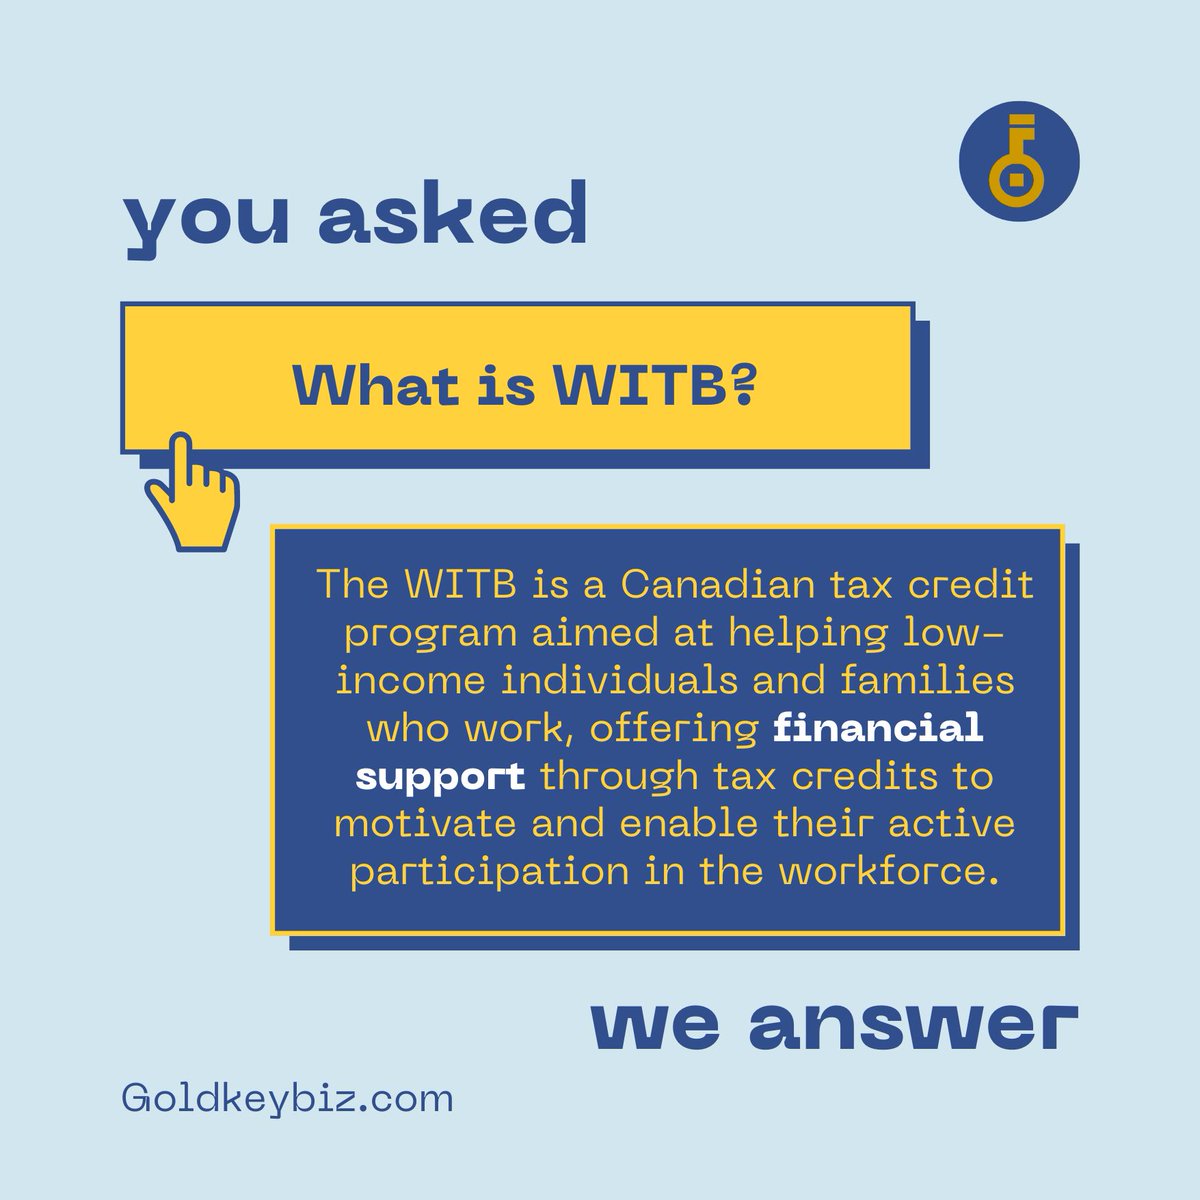 Unlock Financial Support: Learn how the WITB empowers low-income earners in Canada💰
 #WITB #Financialassistance #Workforcesupport #Taxcredits #Incomesupport #FinancialHelp #WorkforceIncentive
#Canadabenefits #LowIncomeassistance #Economic #Financial #Incometax #Taxrelief